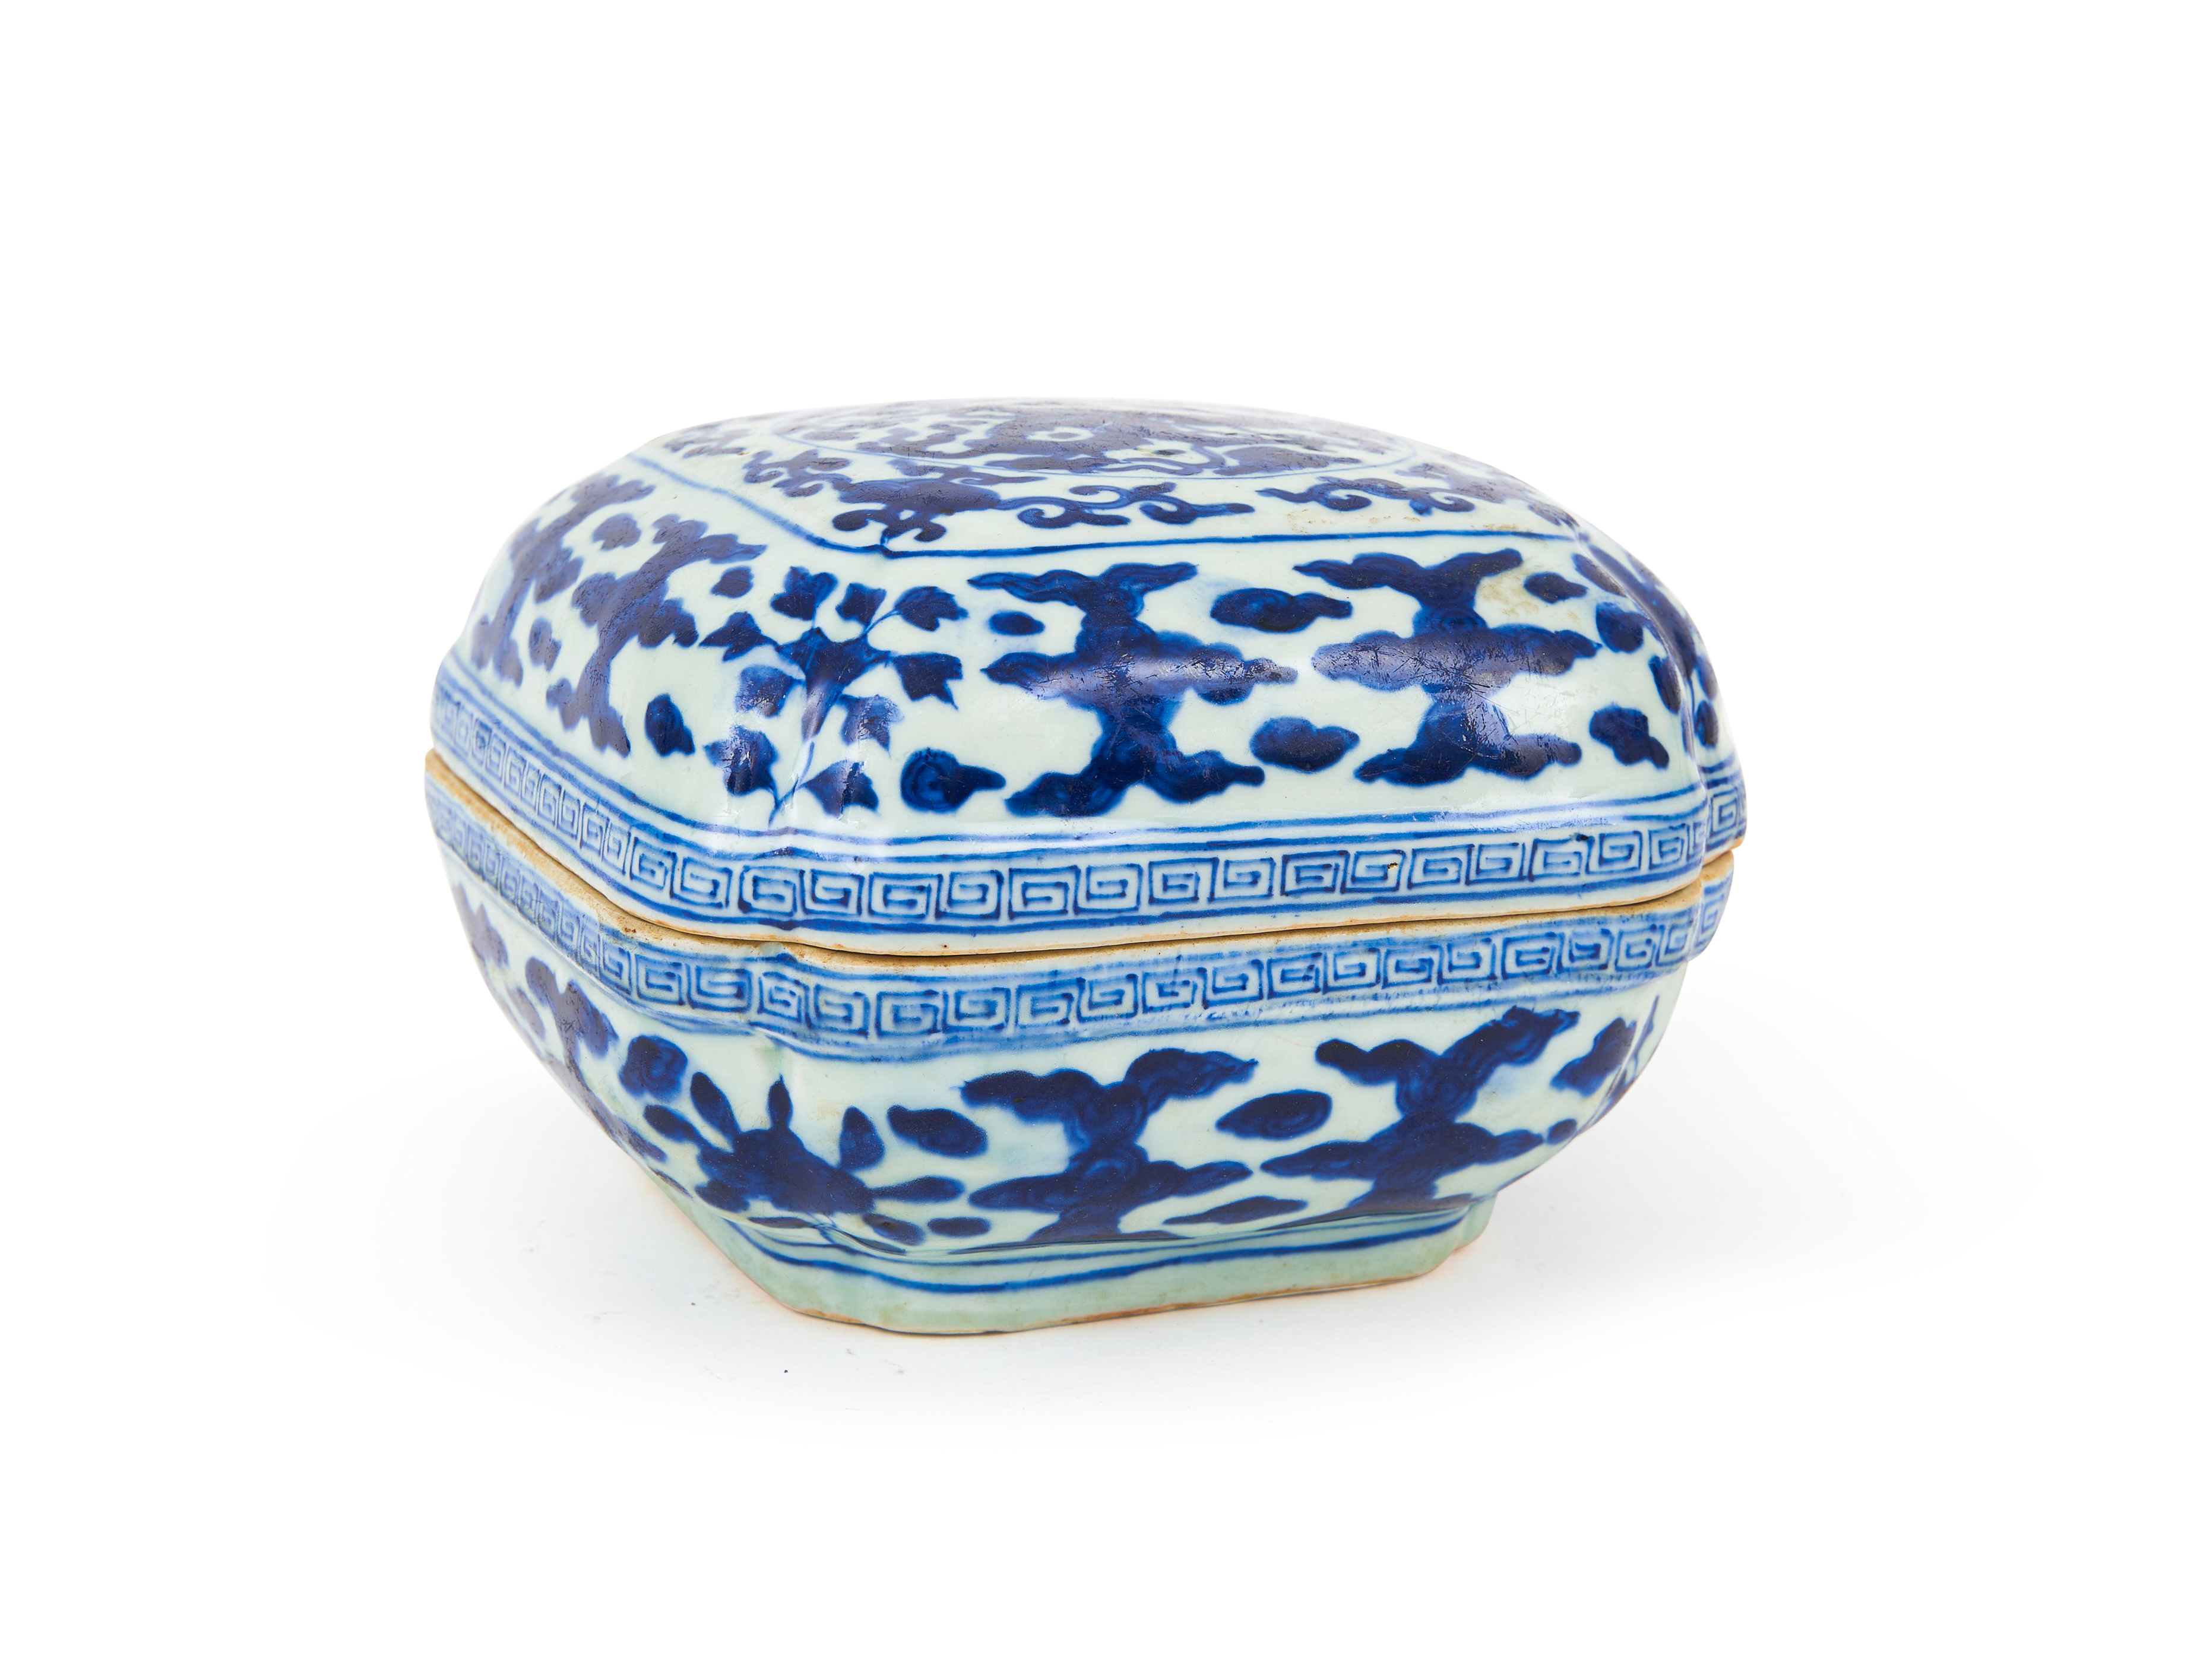 A LARGE CHINESE BLUE AND WHITE 'DRAGON' BOX AND COVER, QING DYNASTY (1644-1911) - Image 2 of 3